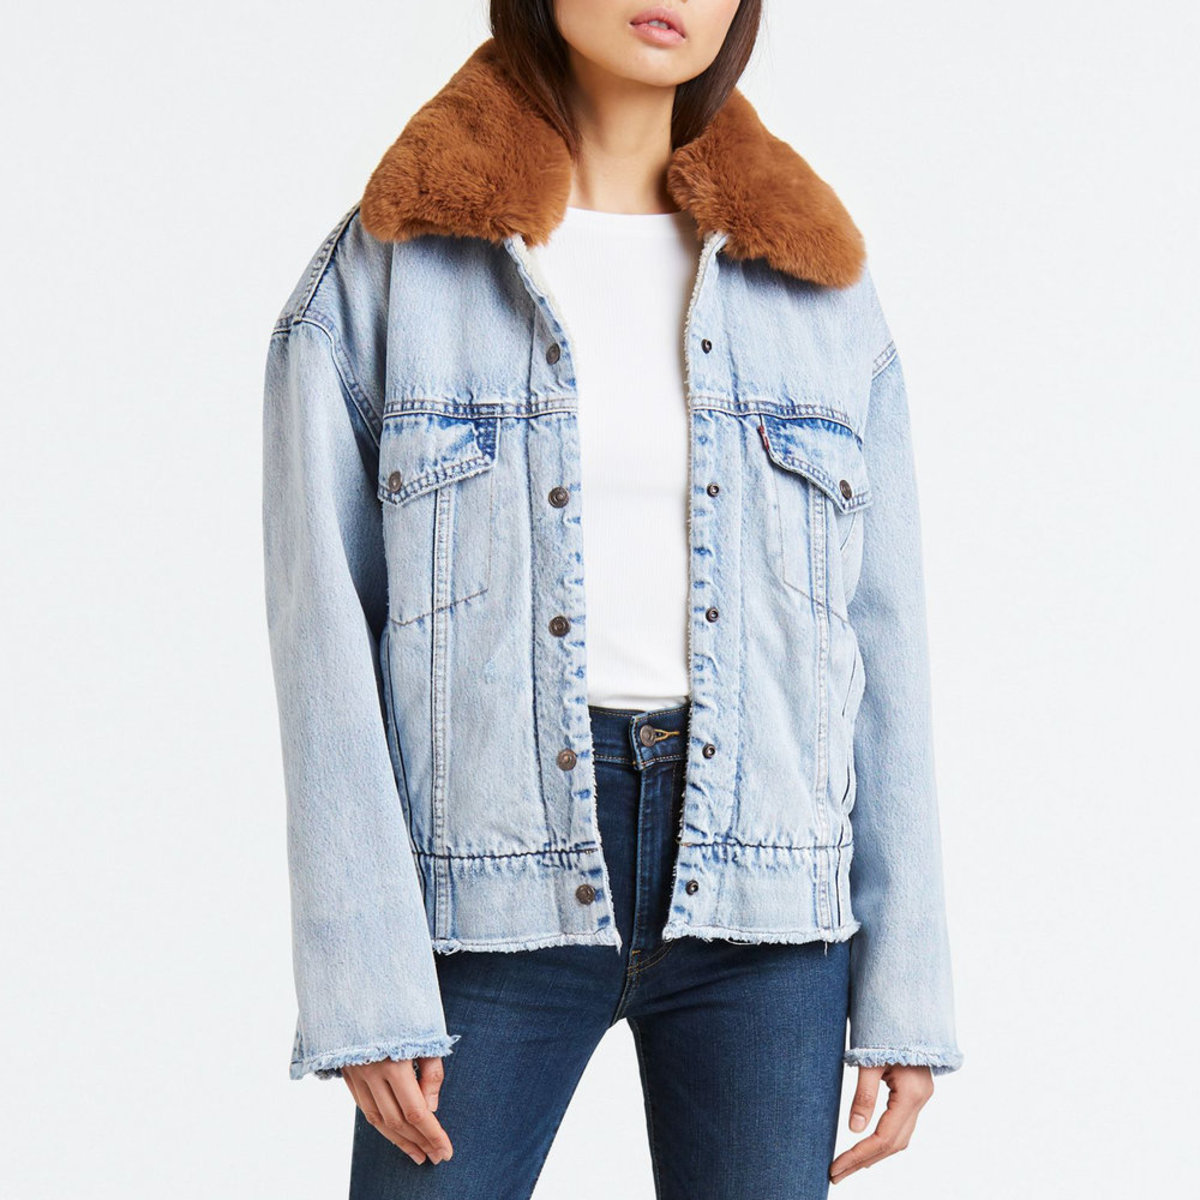 Levi’s Sherpa Jacket w/ Removable Fur Collar $168 